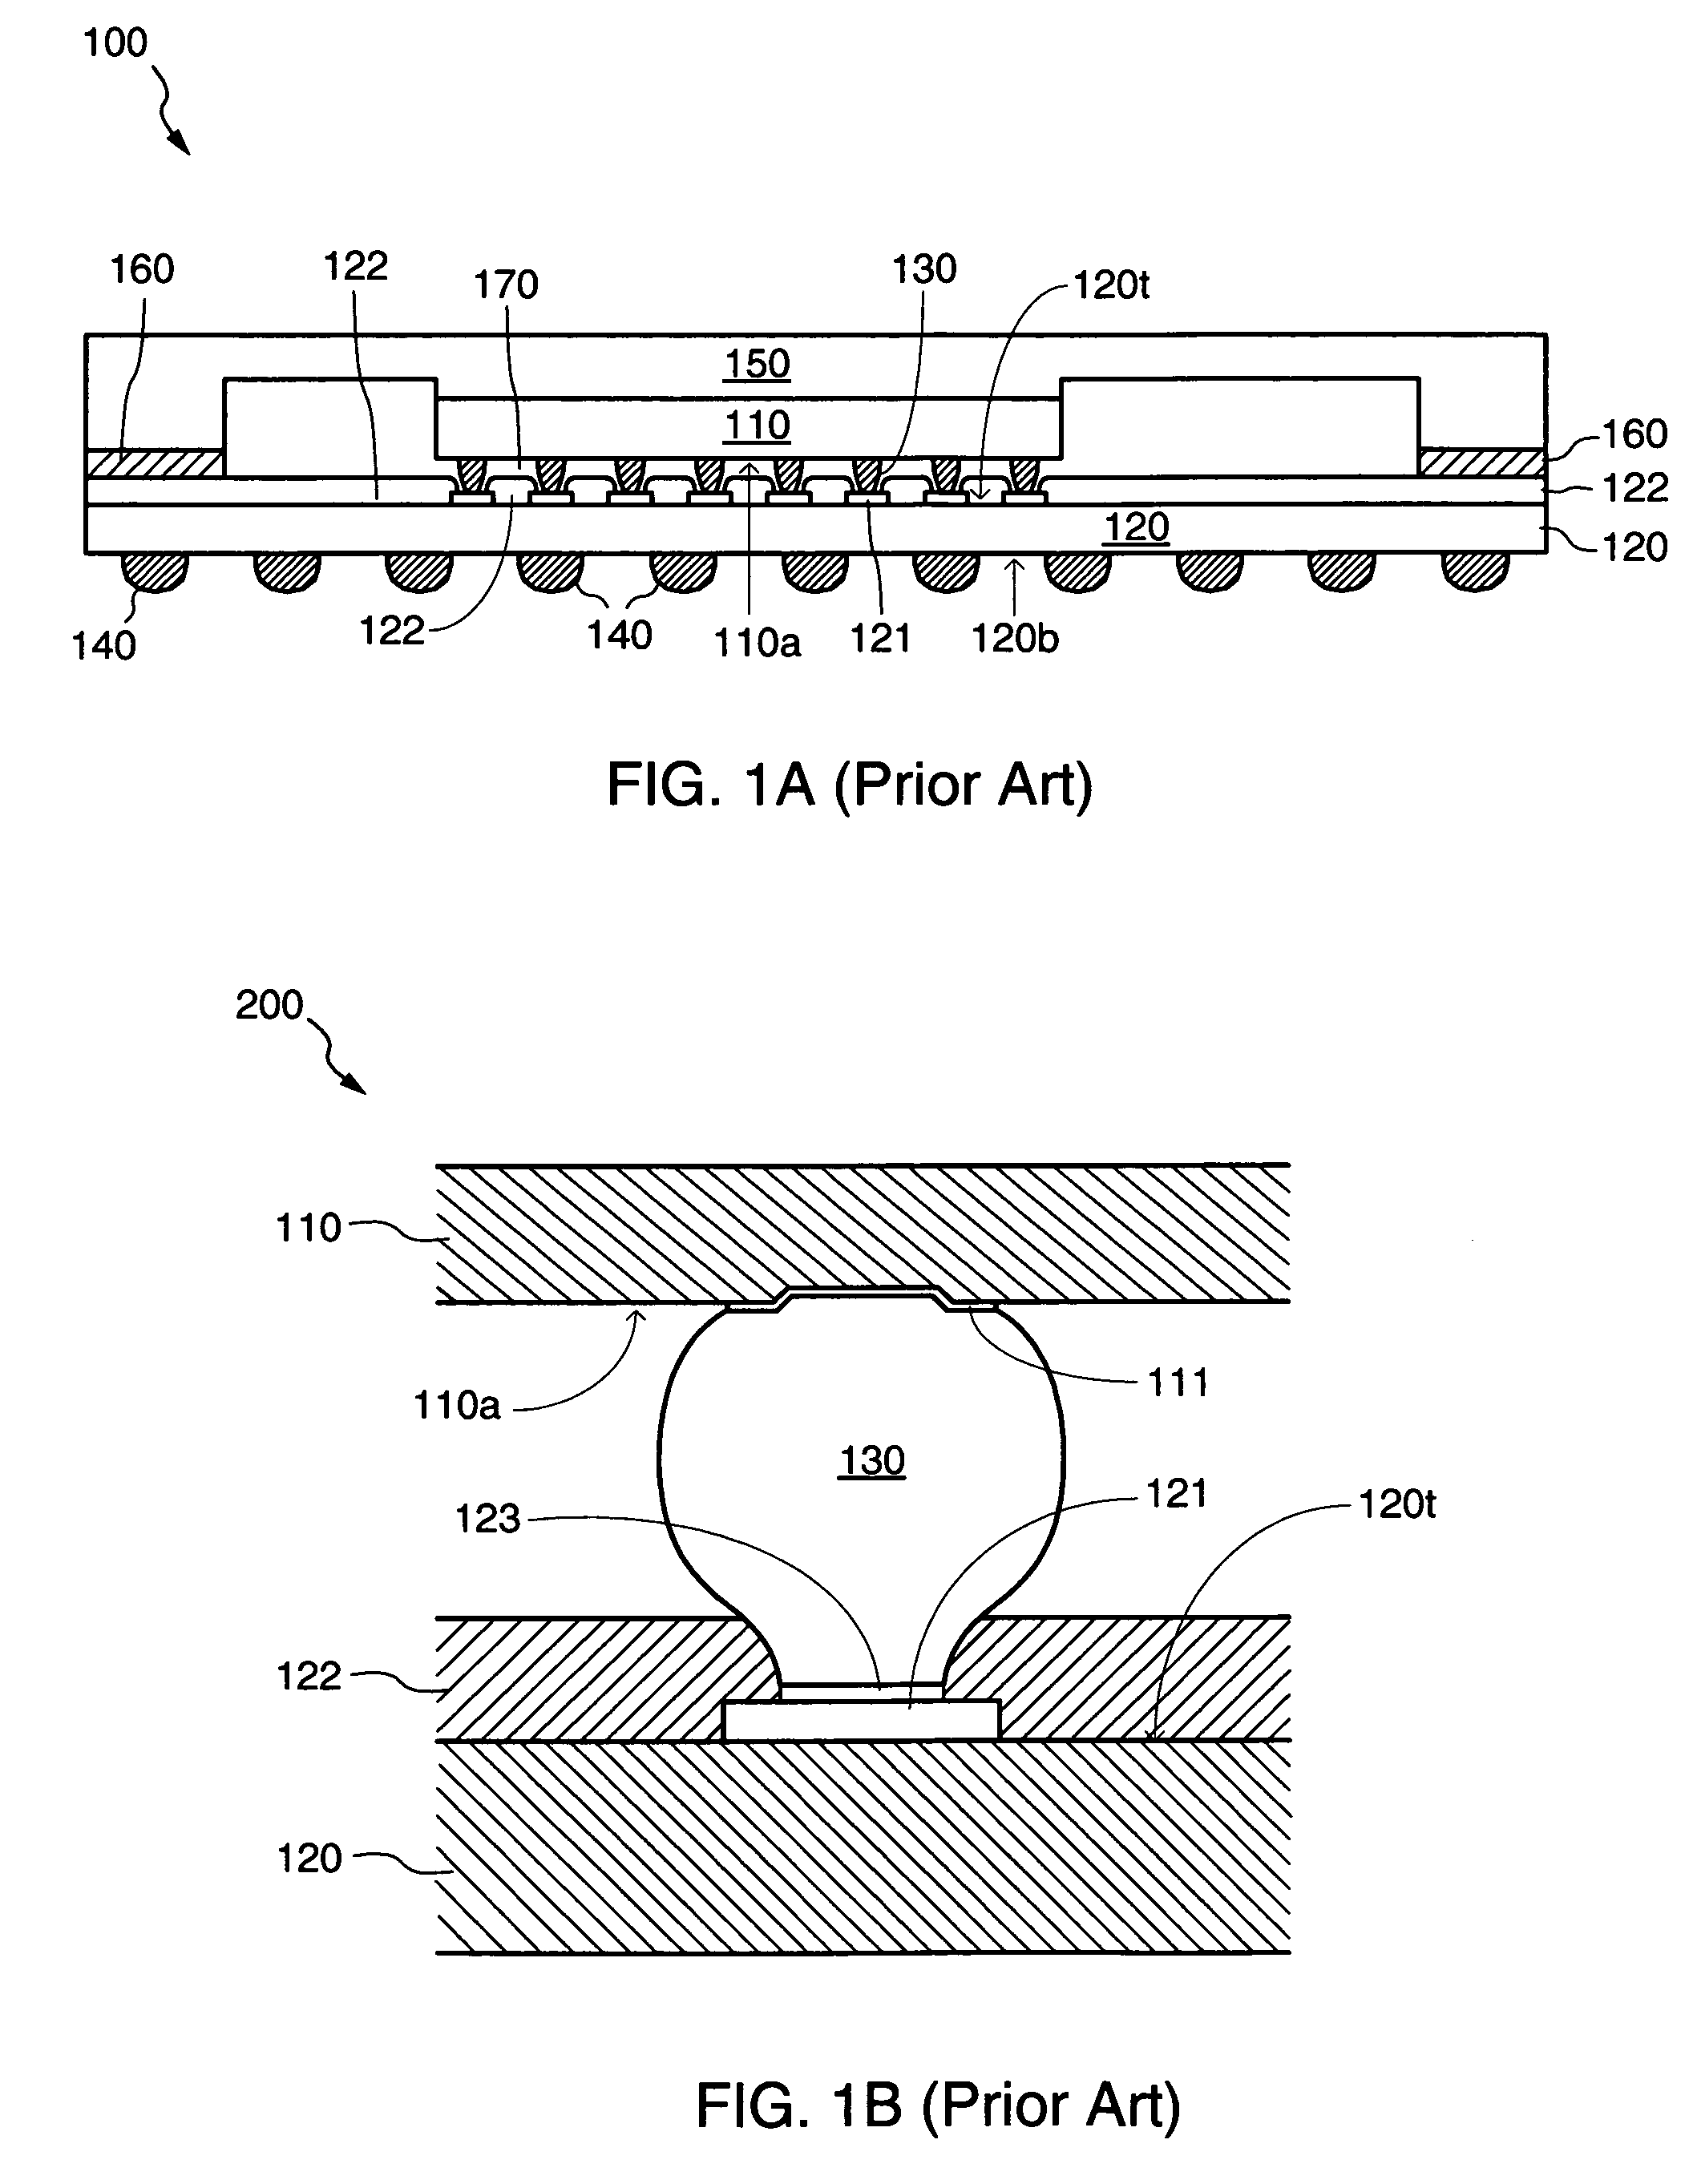 Flip-chip package having thermal expansion posts